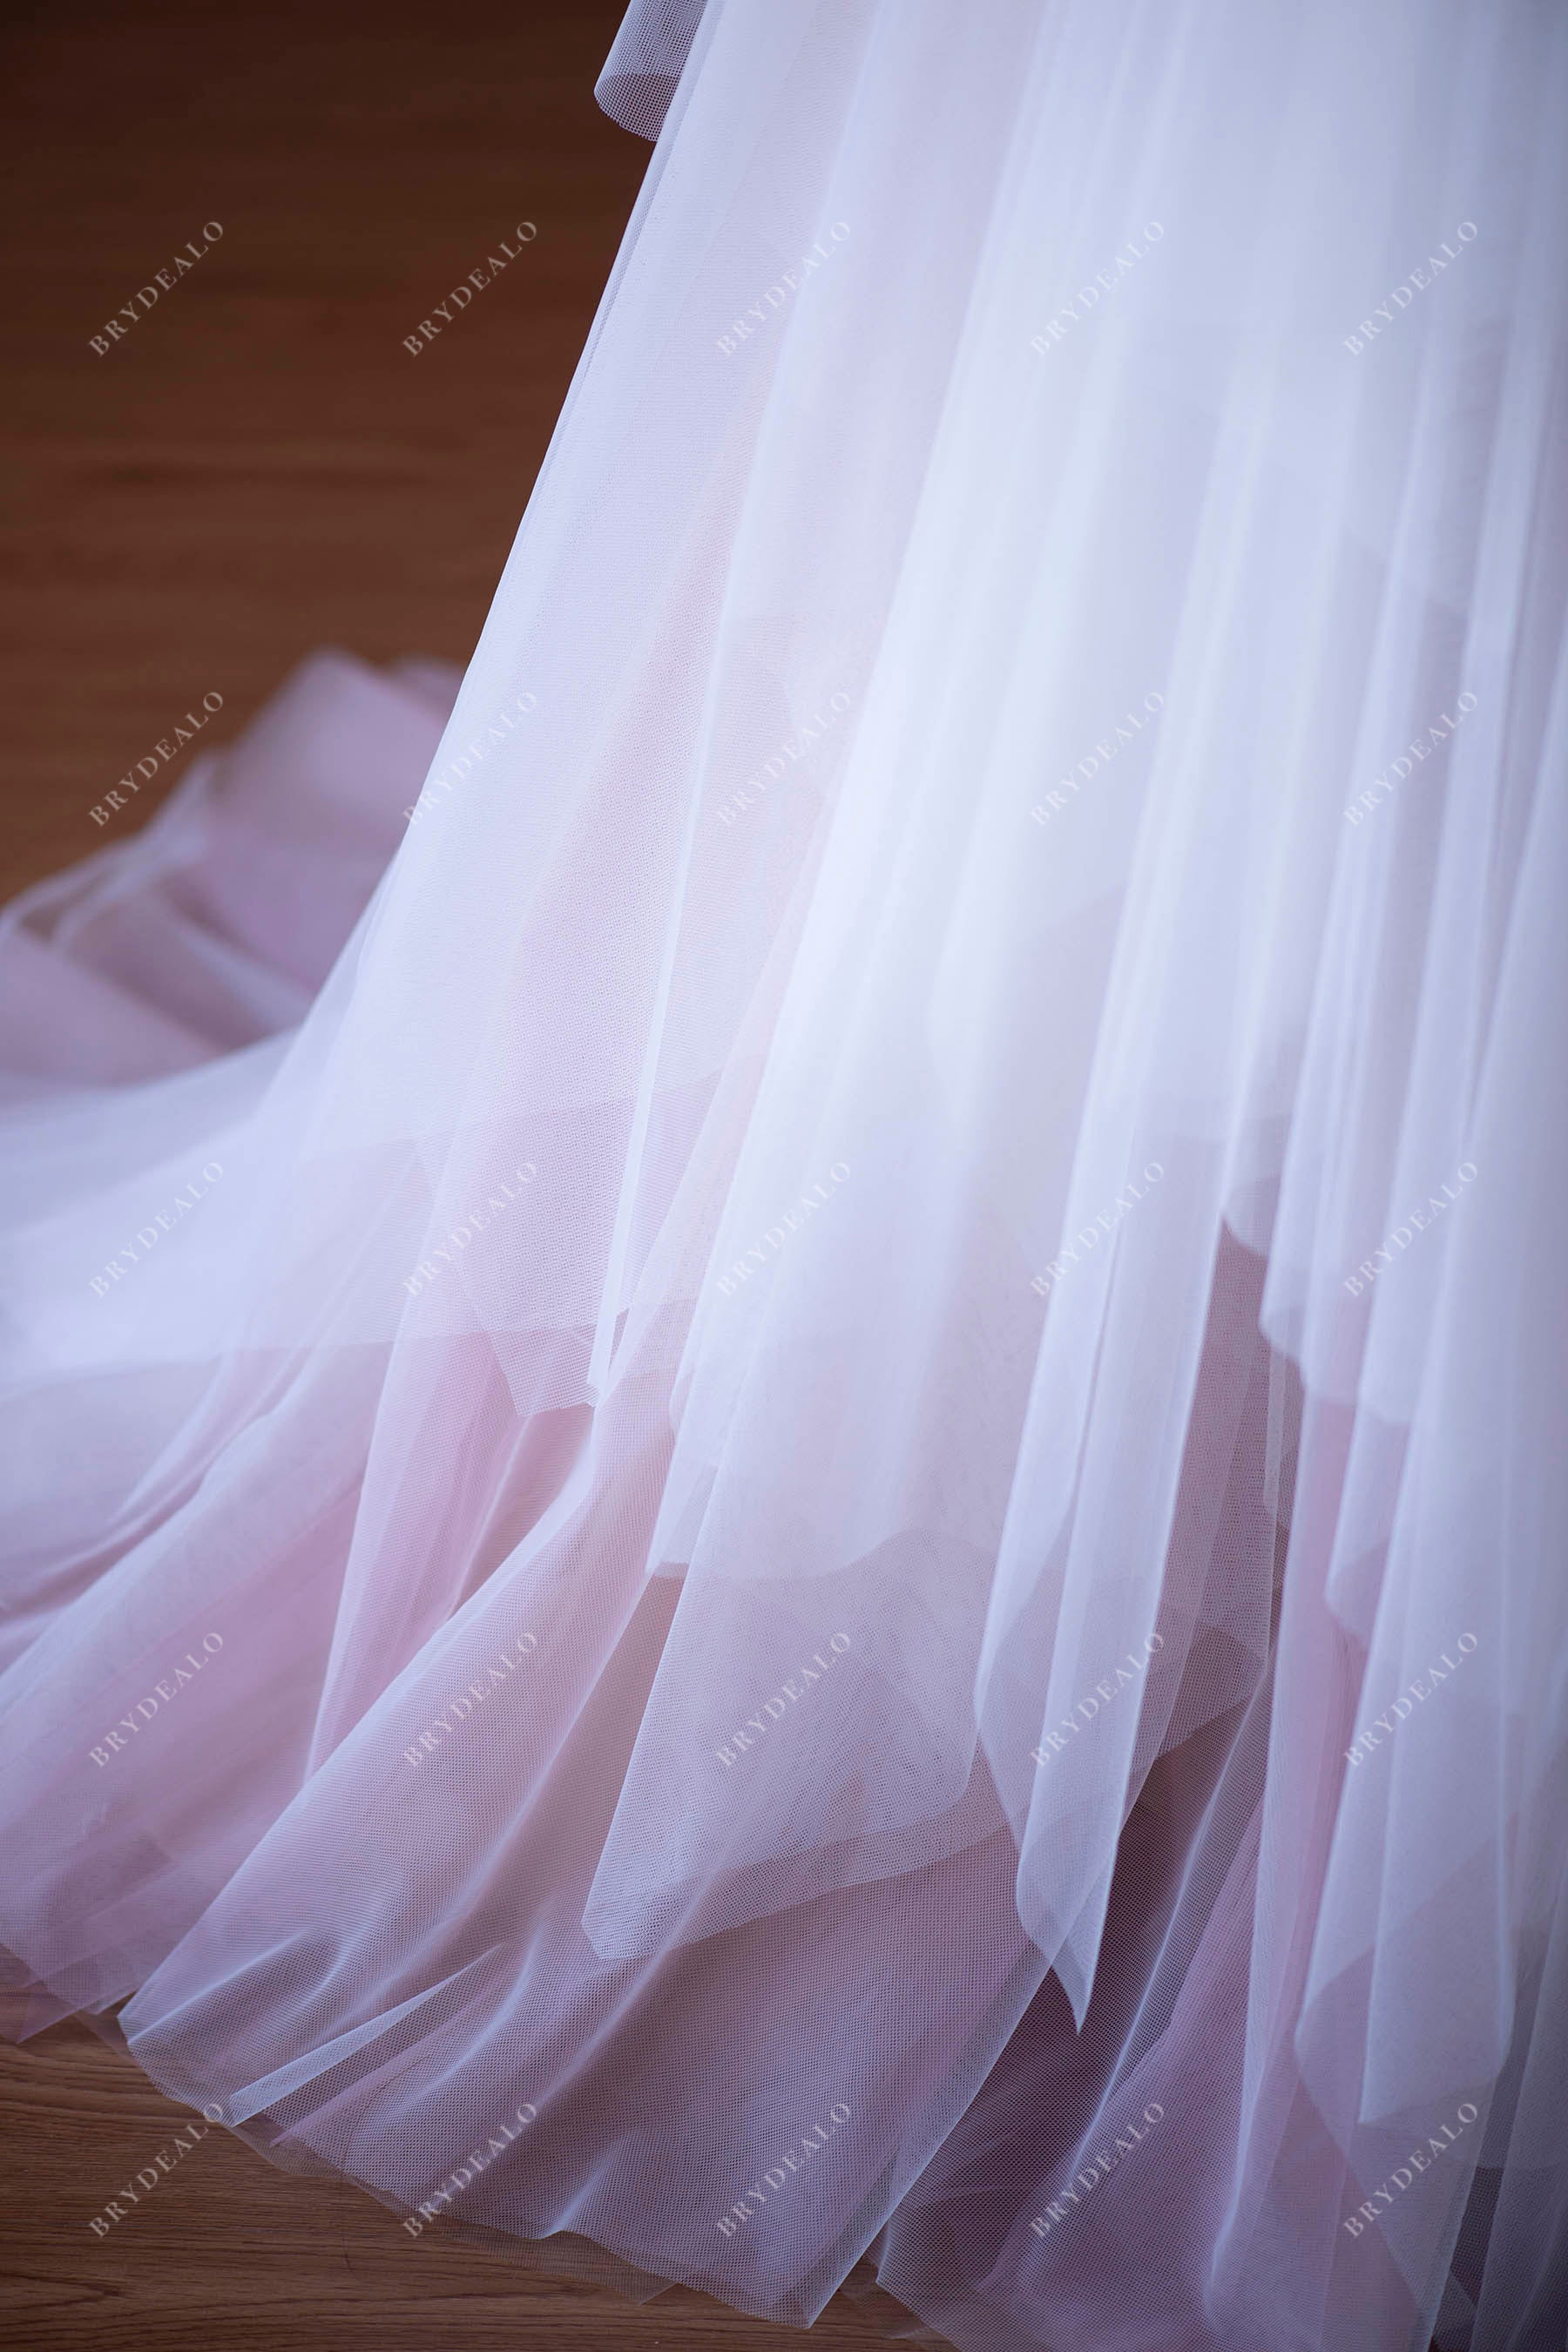 Sample Sale | Two-Piece Flower Lace Tulle Layered Wedding Dress